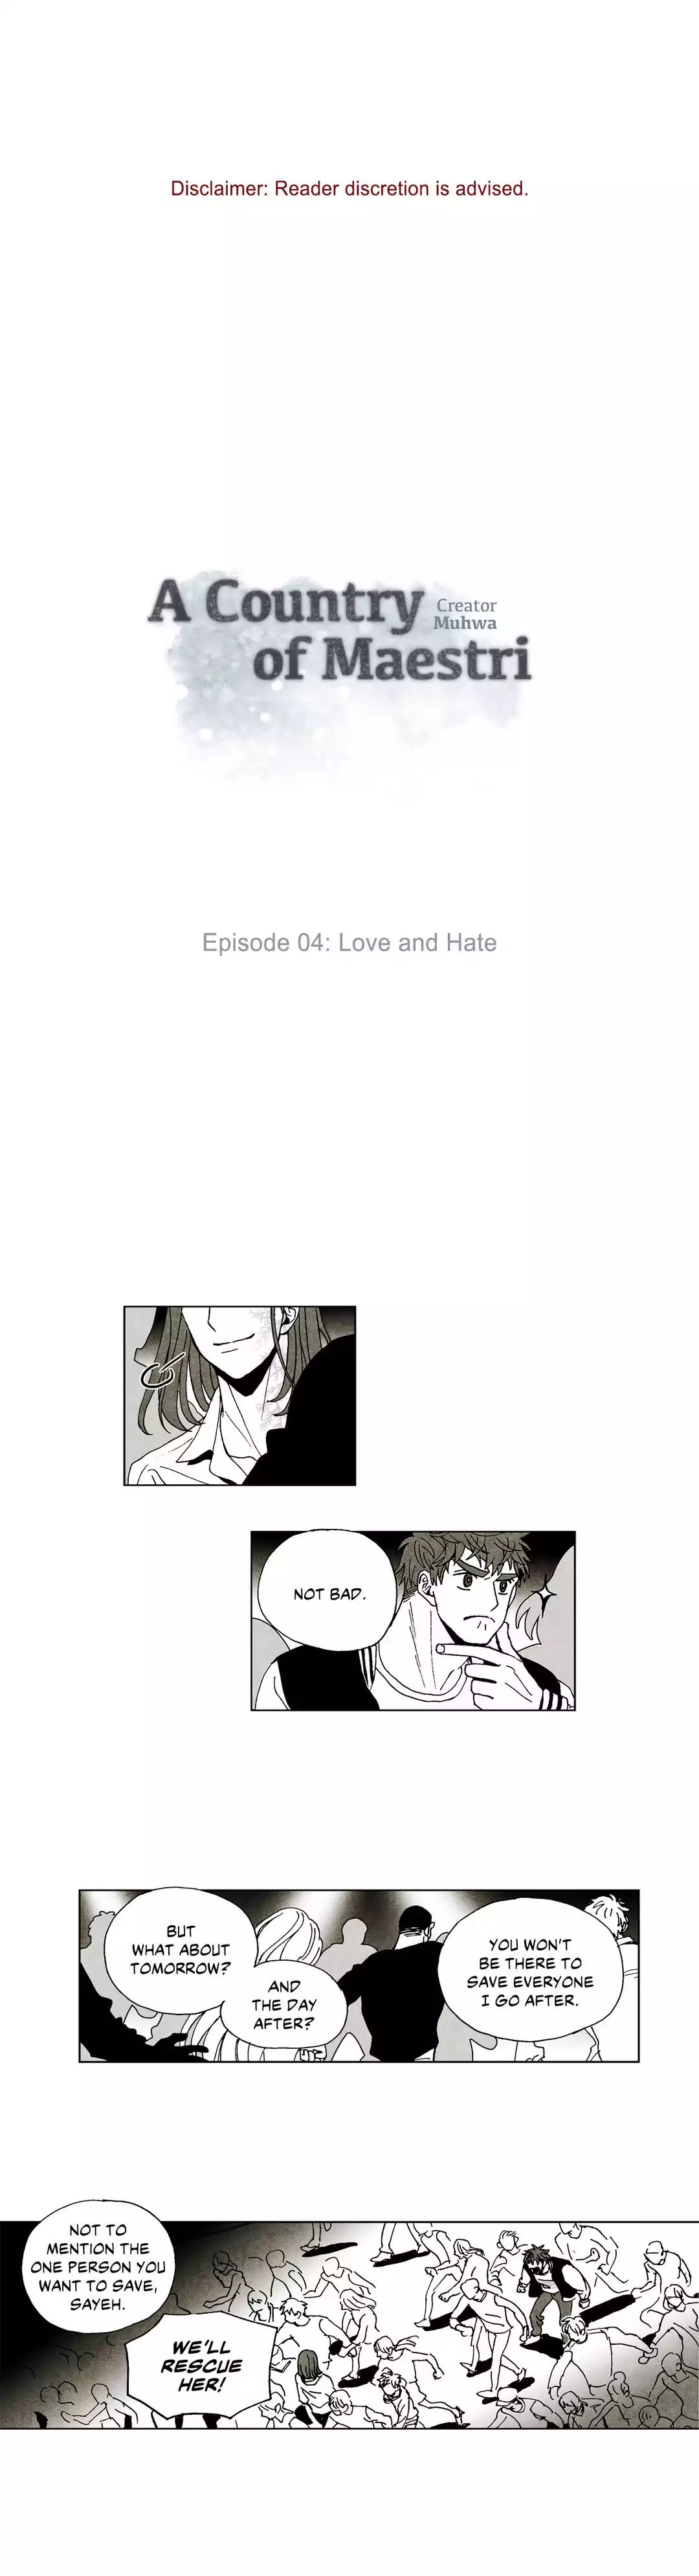 A Country Of Maestri Chapter 65: Episode 4: Love And Hate (15) - Picture 1